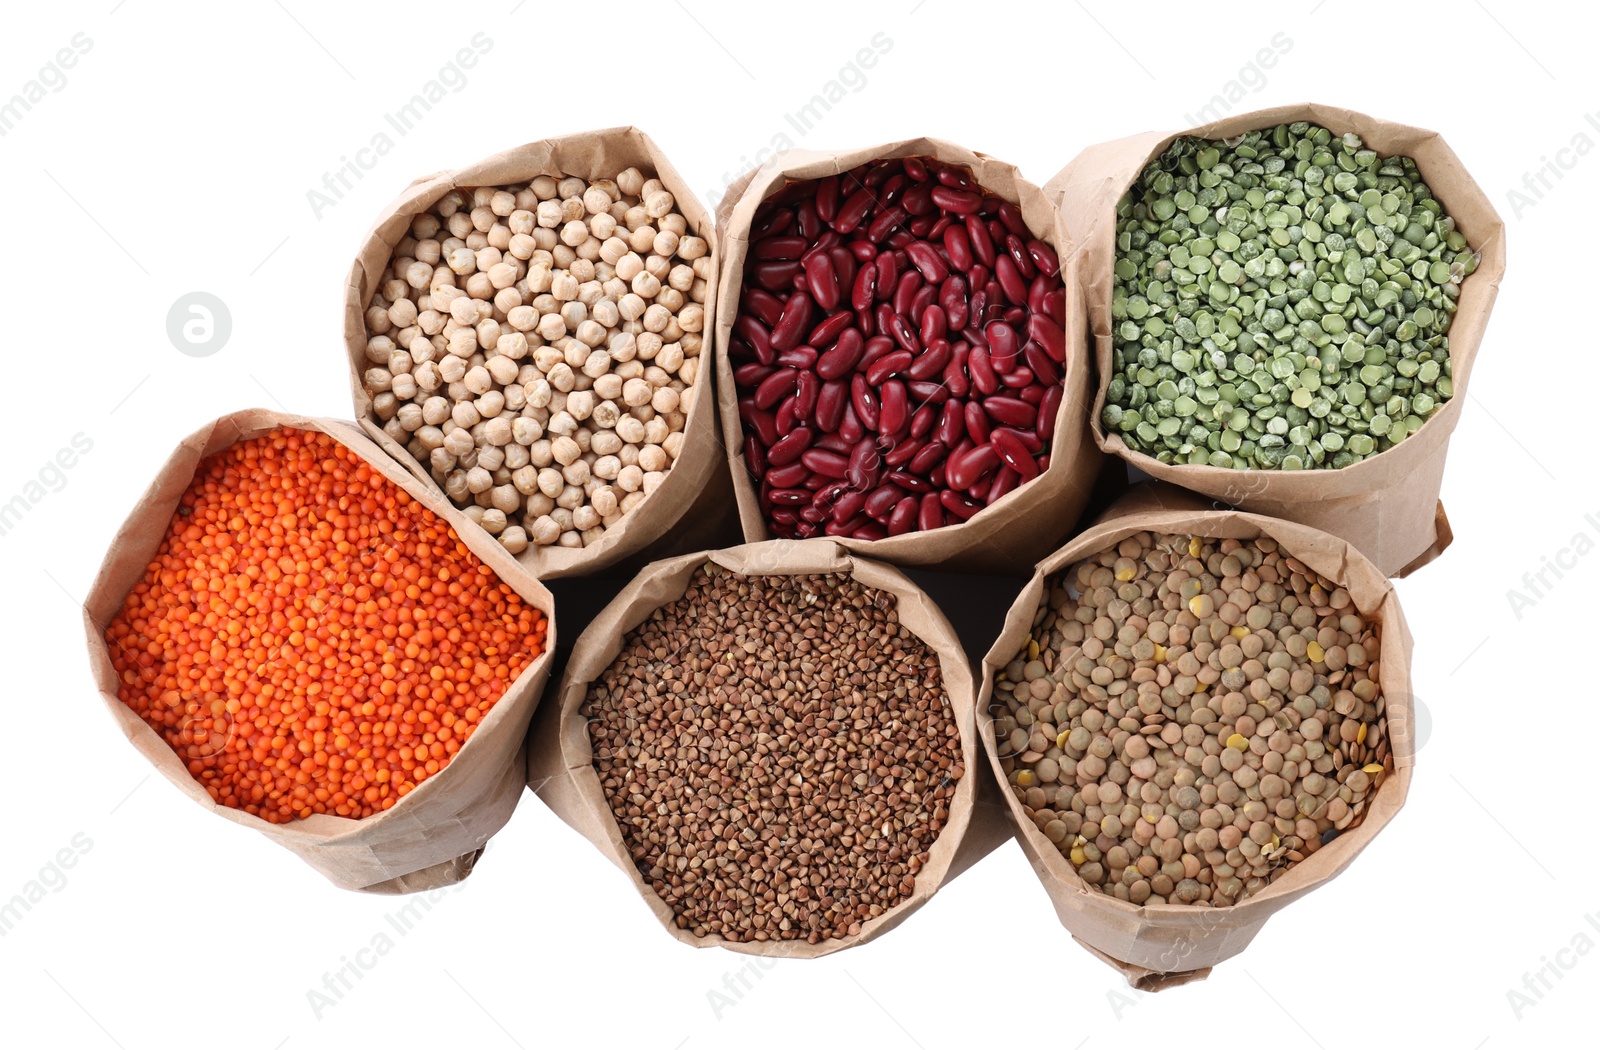 Photo of Different types of legumes and cereals in paper bags on white background, top view. Organic grains